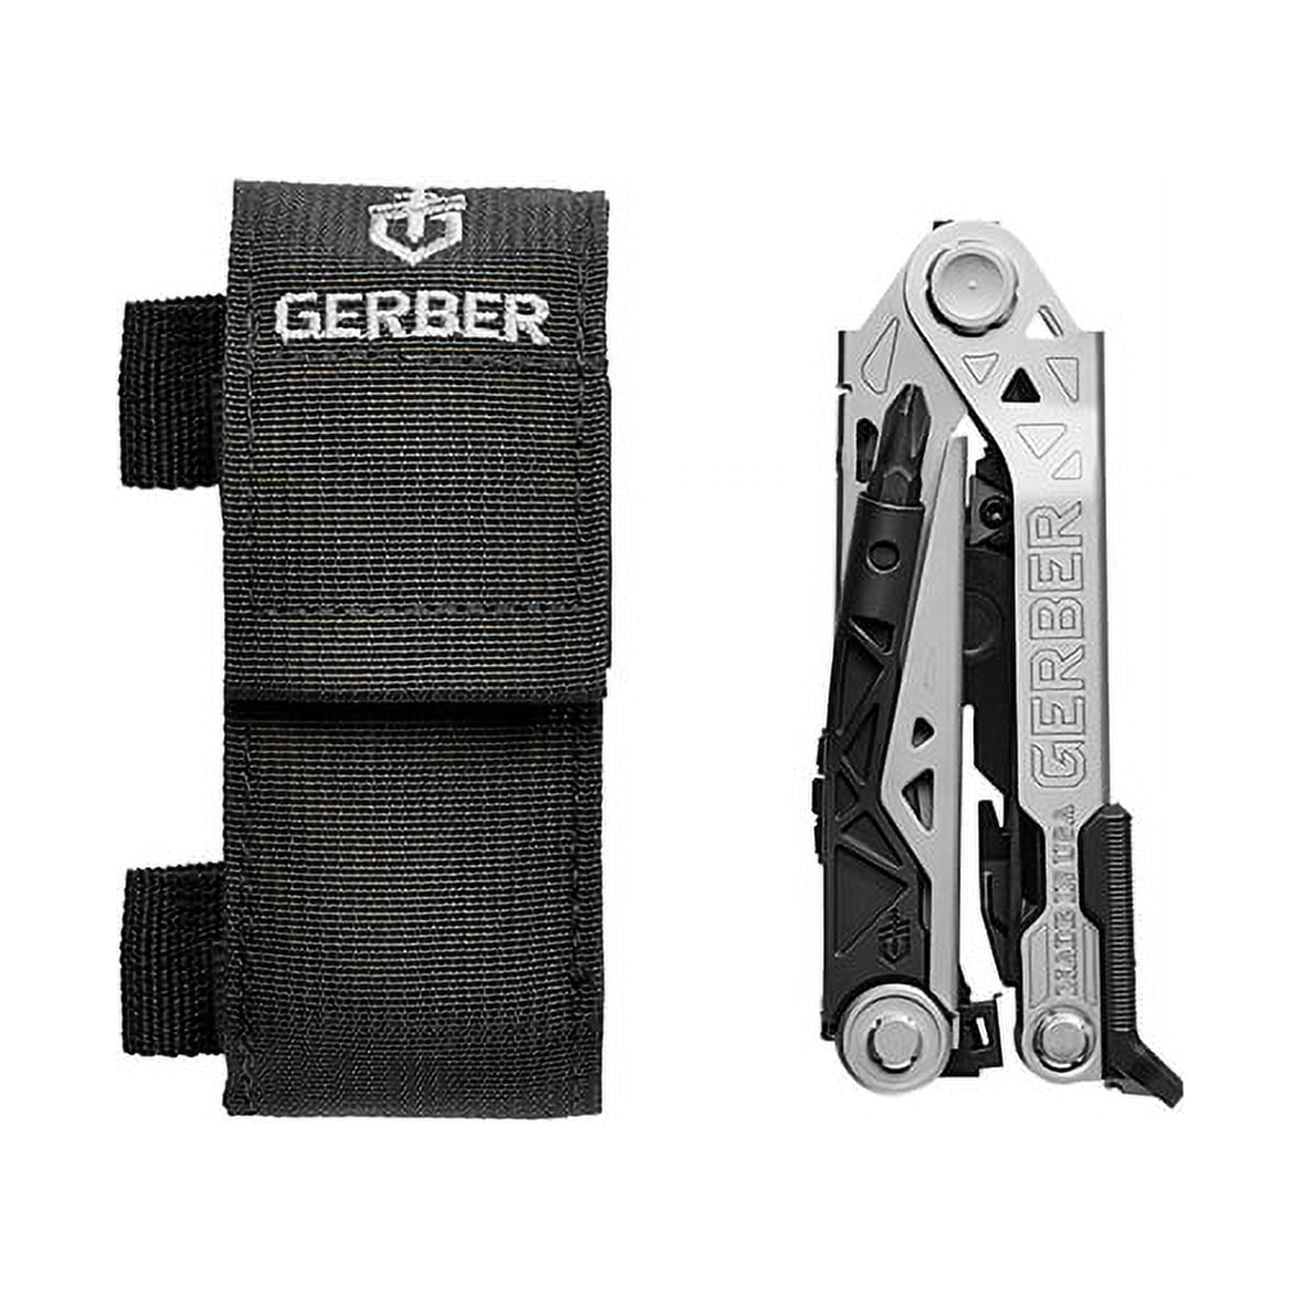 Purchase the Gerber Multitool Center Drive gray/black by ASMC